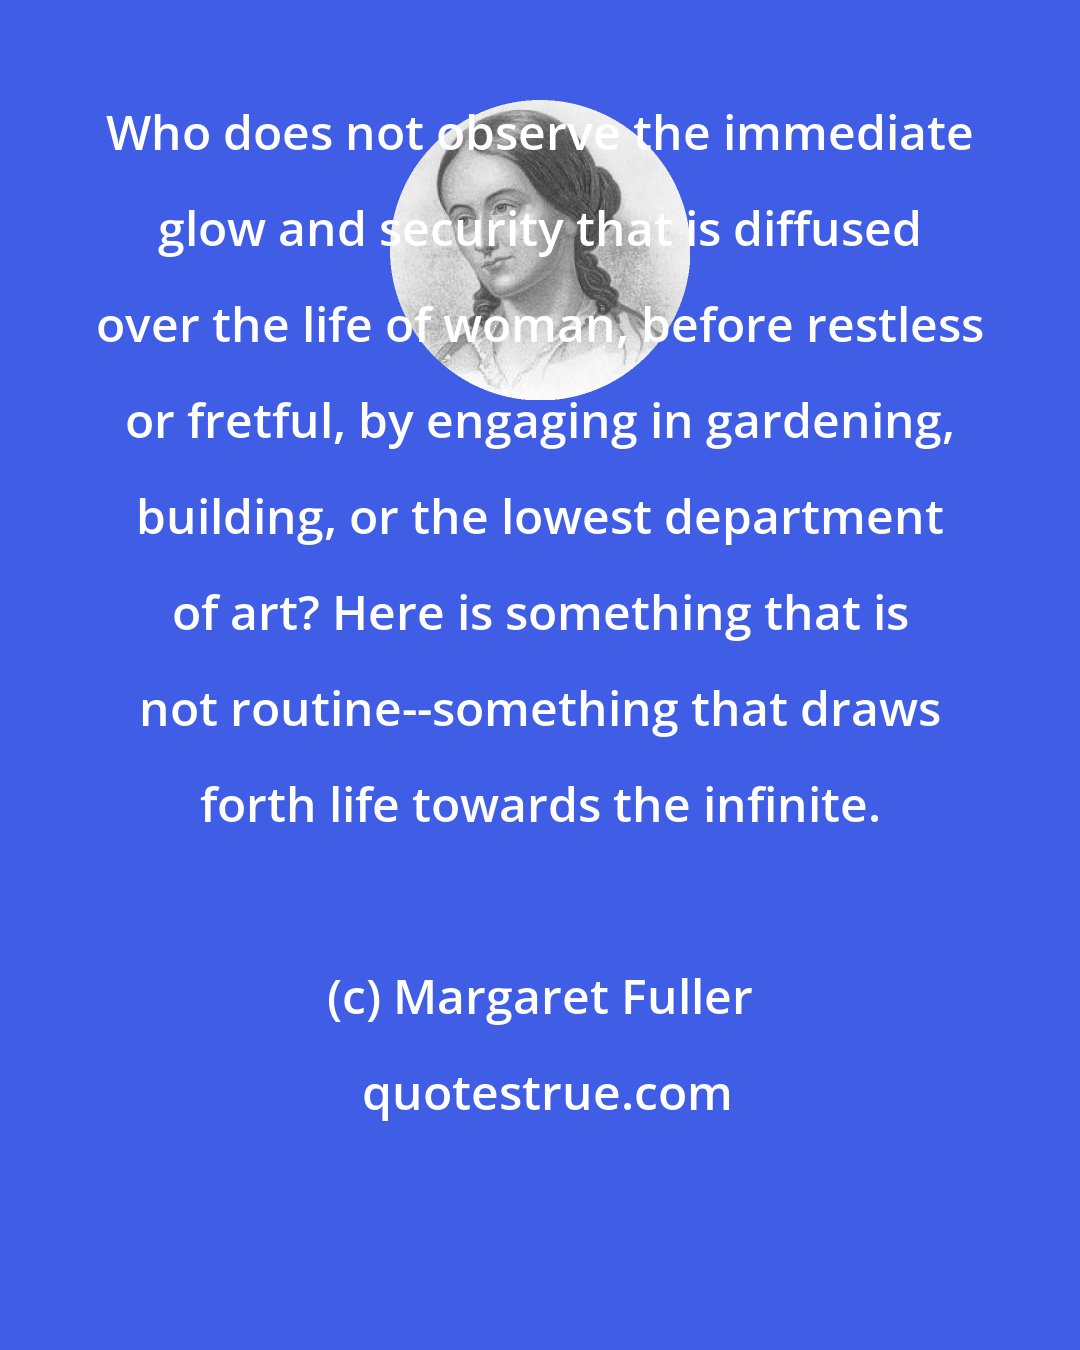 Margaret Fuller: Who does not observe the immediate glow and security that is diffused over the life of woman, before restless or fretful, by engaging in gardening, building, or the lowest department of art? Here is something that is not routine--something that draws forth life towards the infinite.